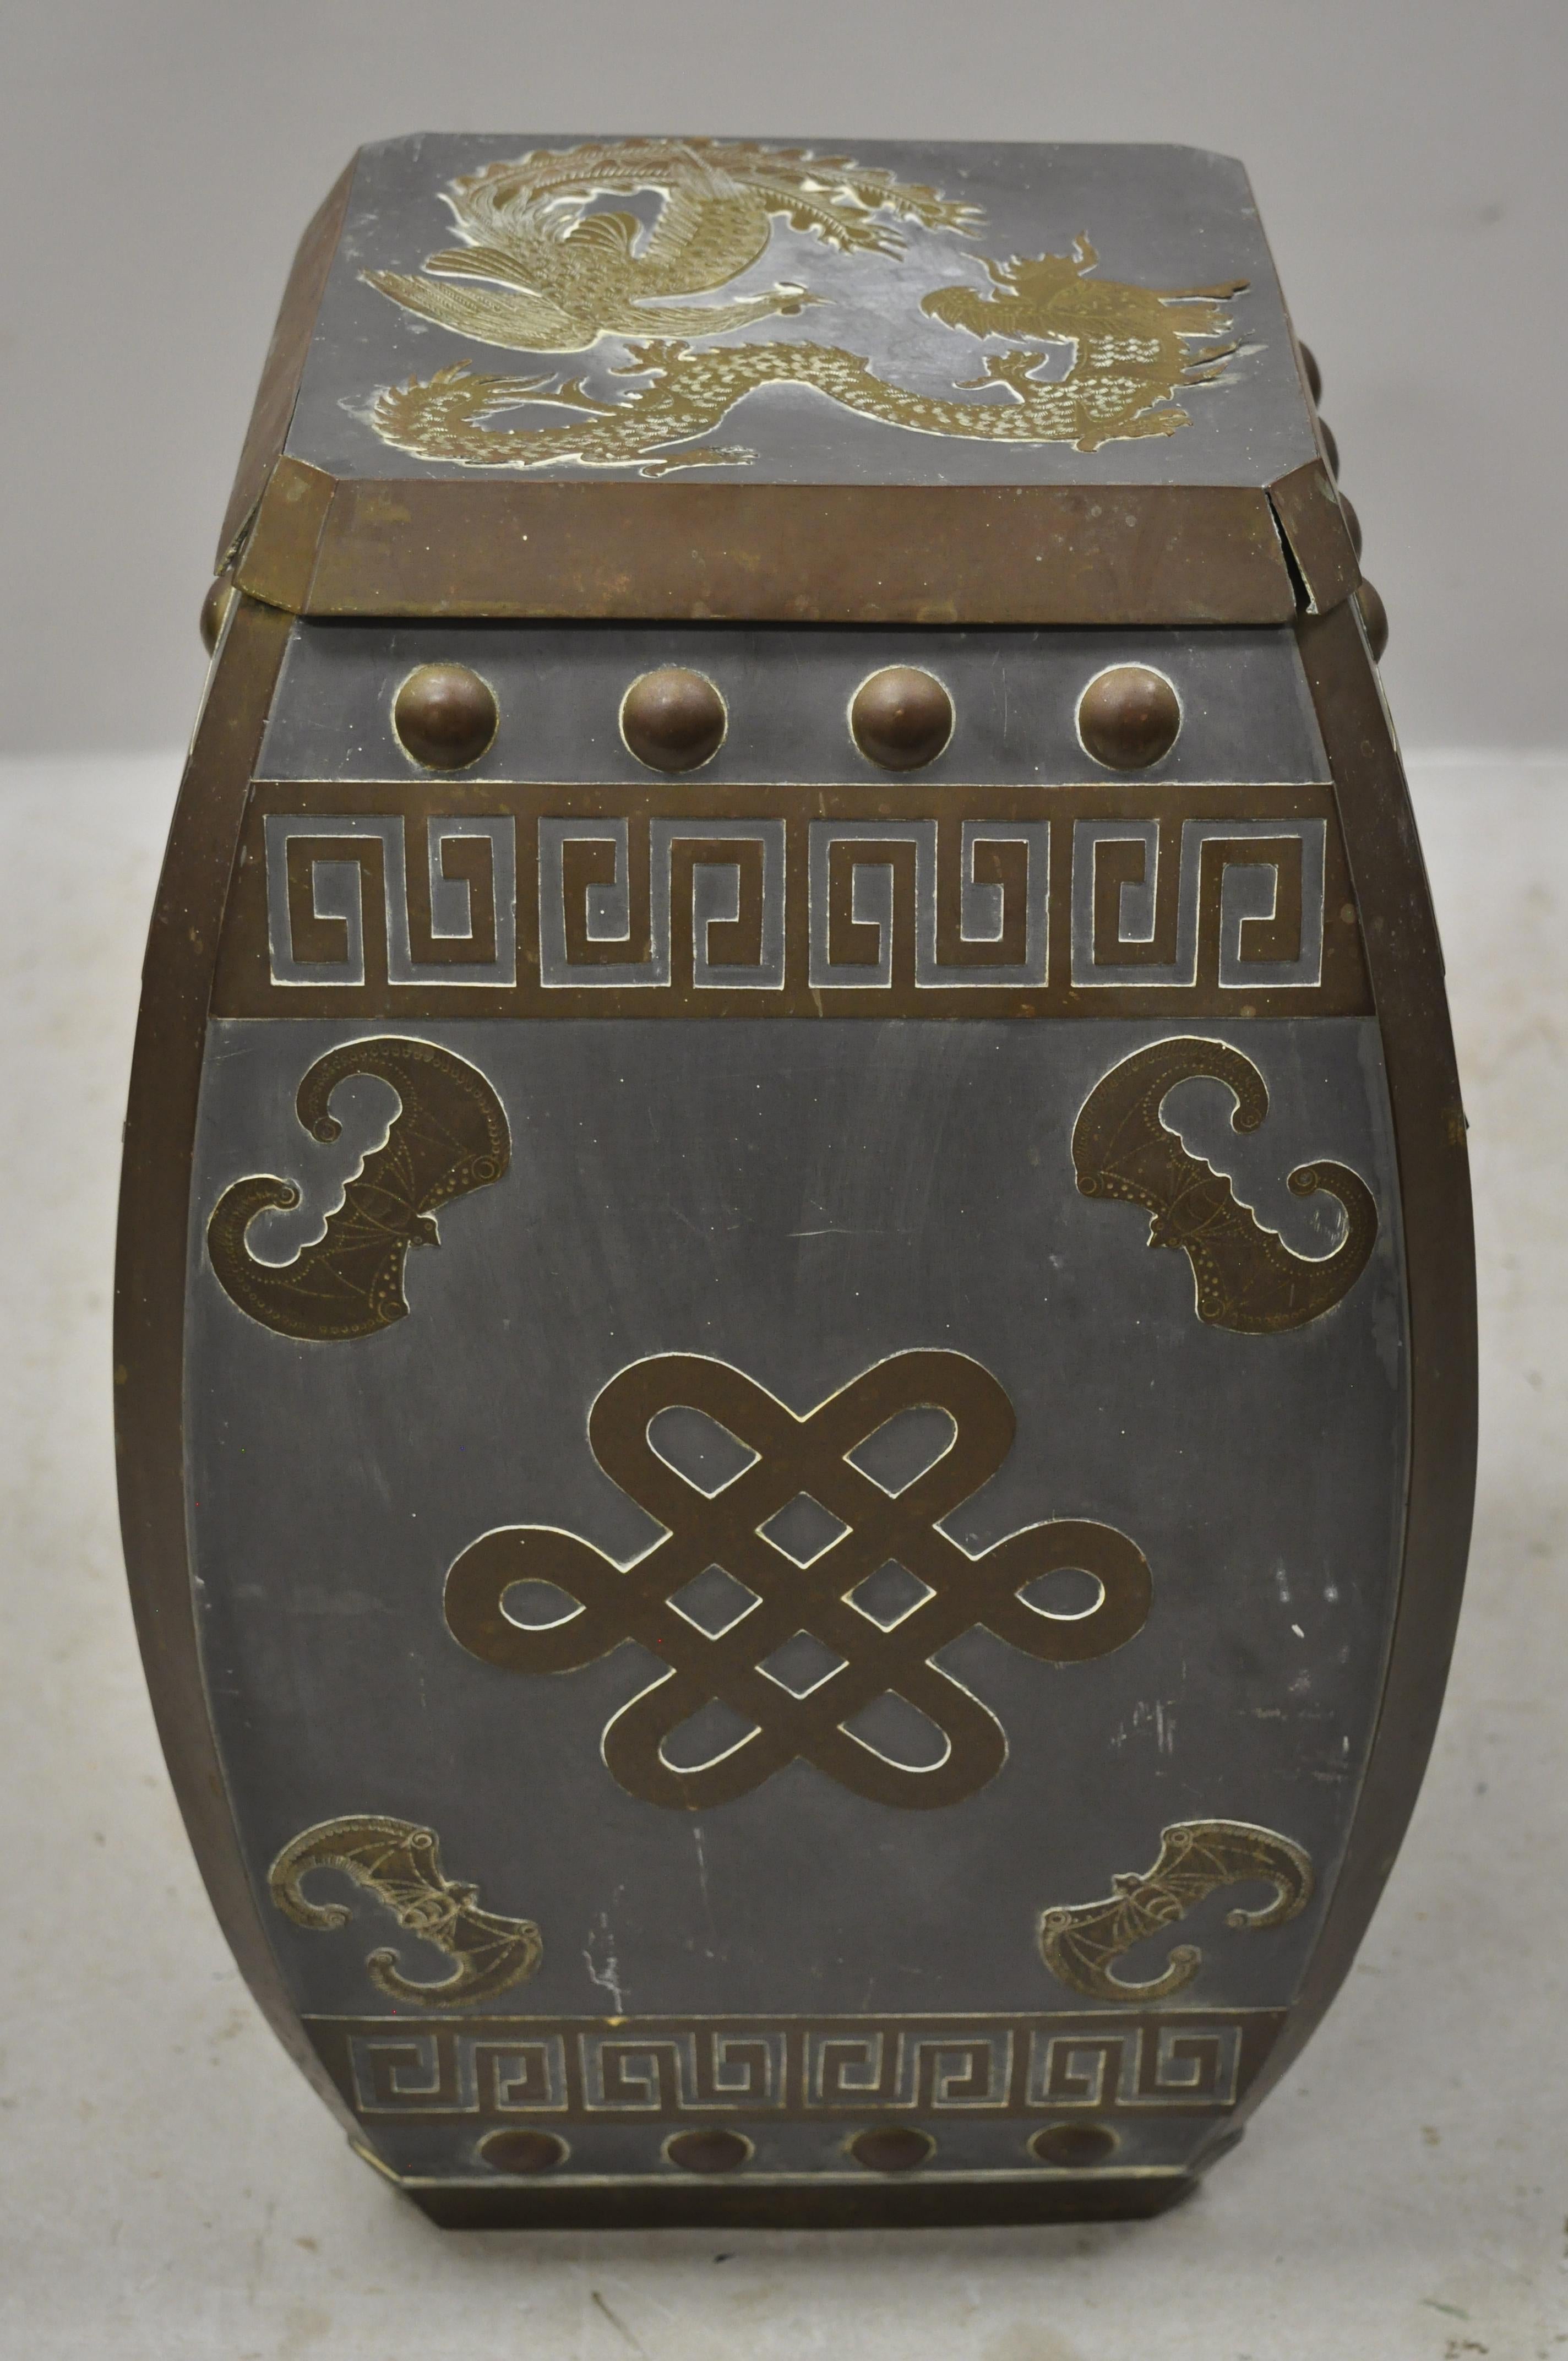 Mid-20th century Chinese oriental pewter and brass garden drum stool drinks table. Item features ornate brass detail, dragon and hou-ou bird top, Greek key design, heavy pewter construction, circa early to mid-20th century. Measurements: 18.5